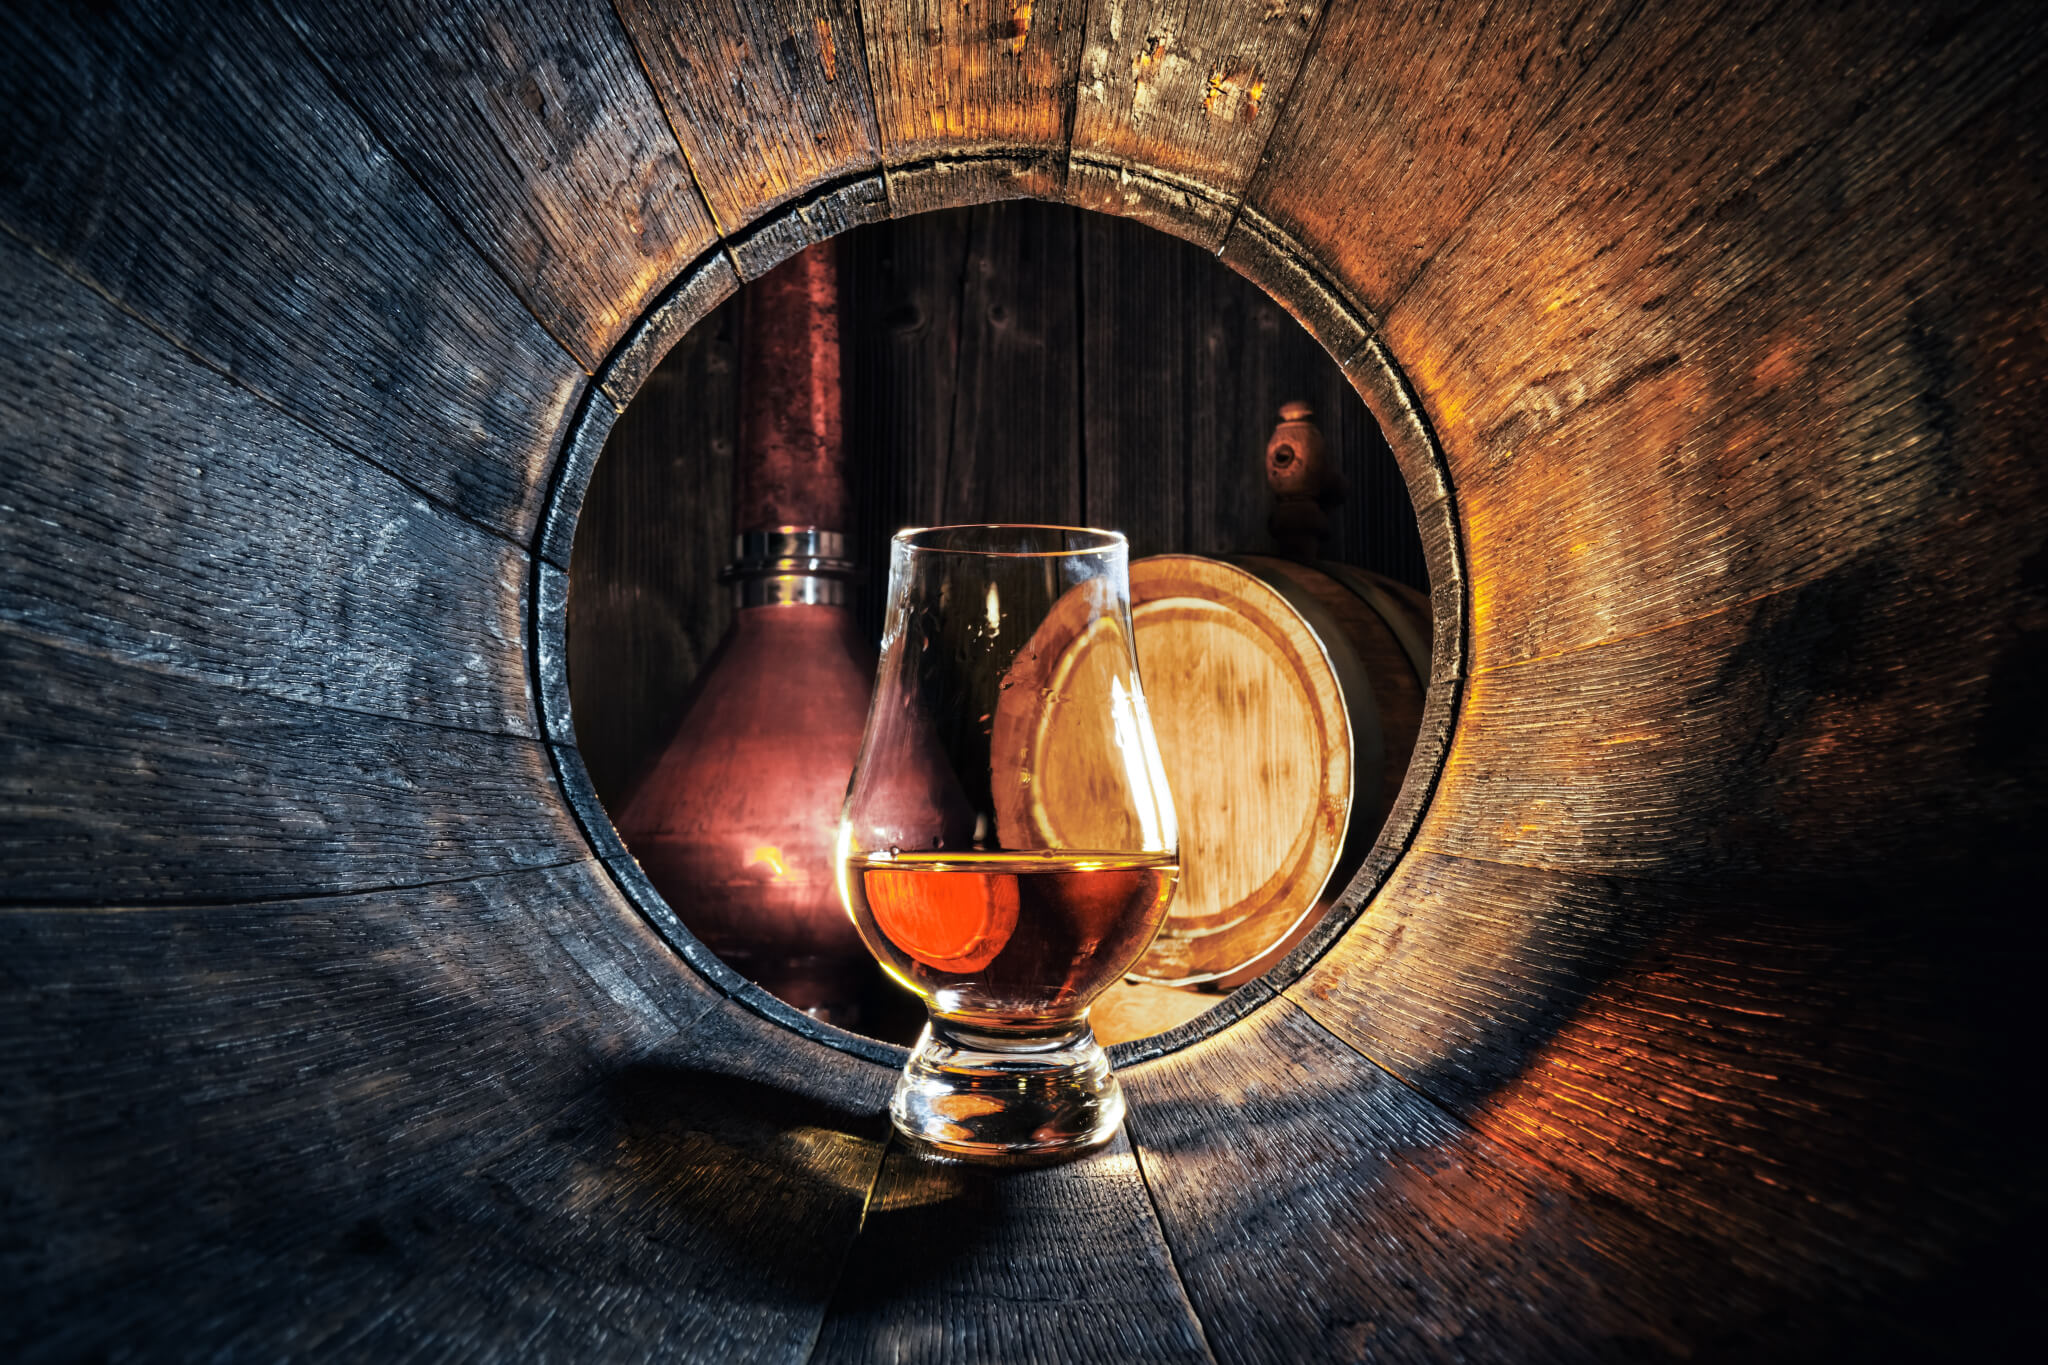 A glass of whiskey in a distillery barrel